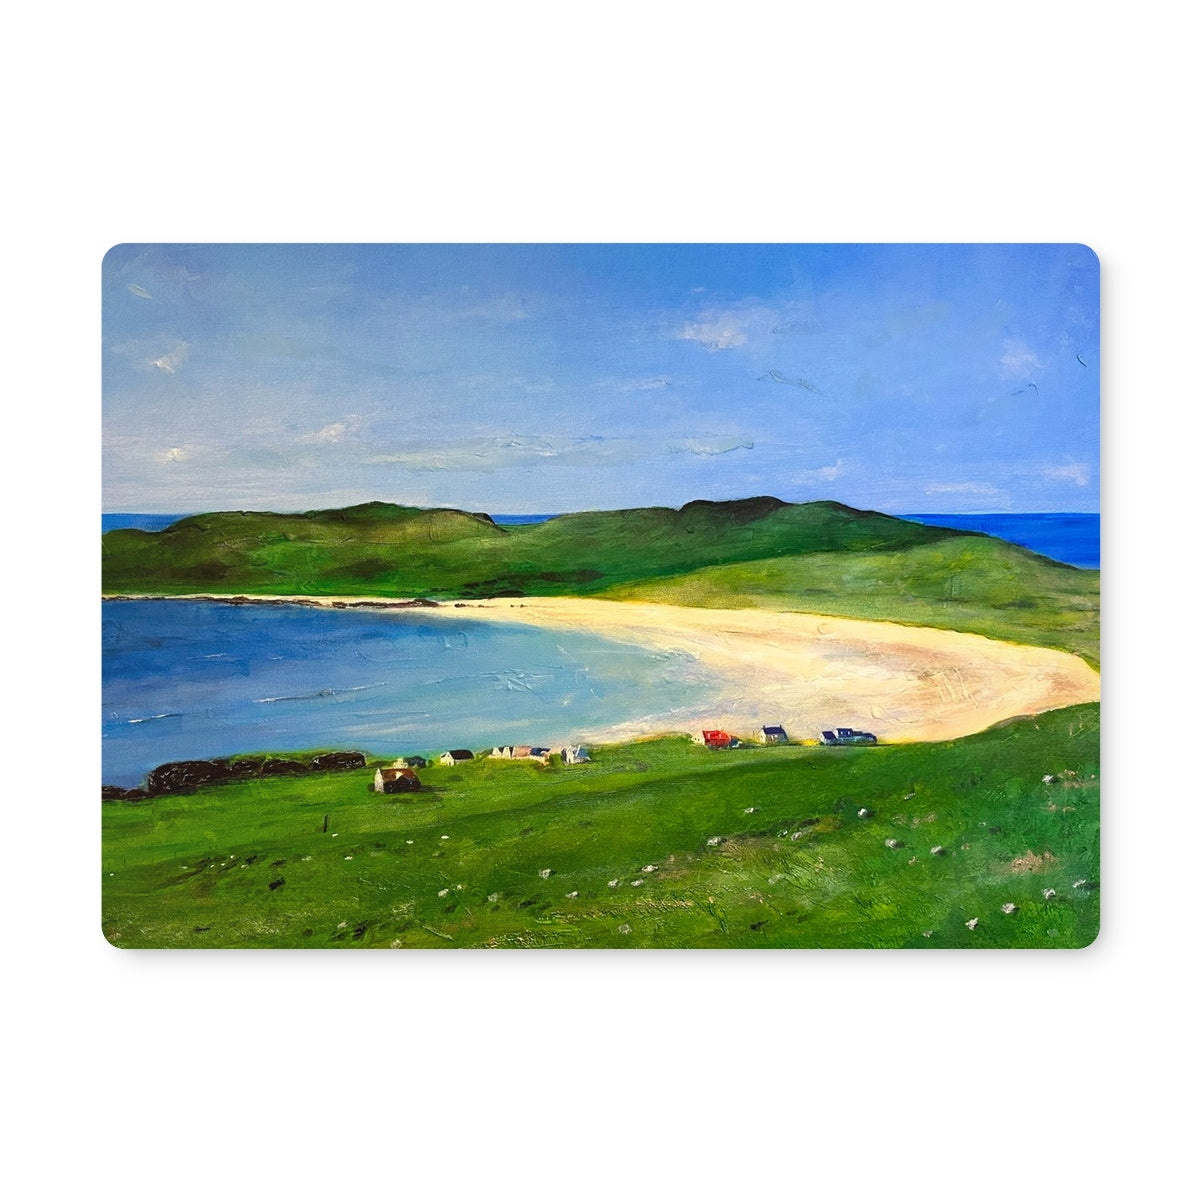 Balephuil Beach Tiree Art Gifts Placemat-Placemats-Hebridean Islands Art Gallery-4 Placemats-Paintings, Prints, Homeware, Art Gifts From Scotland By Scottish Artist Kevin Hunter